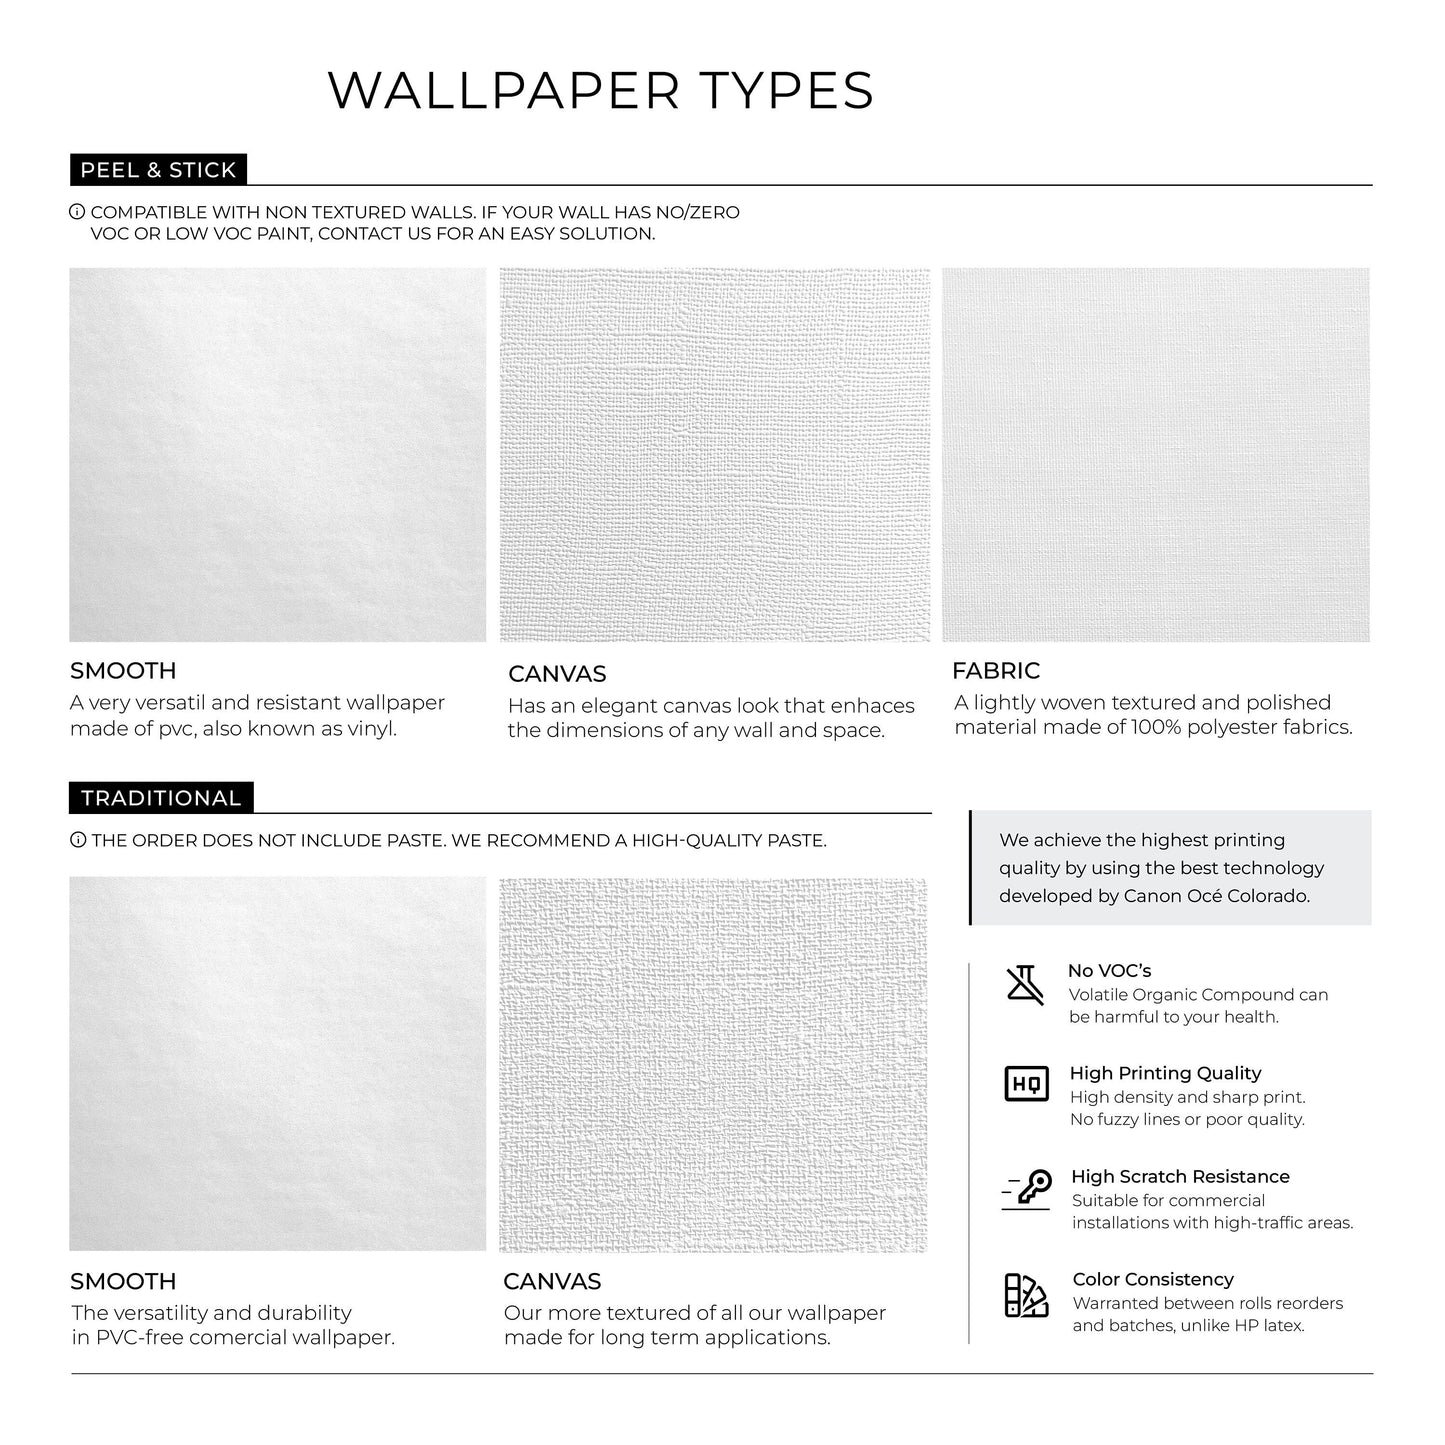 Removable Wallpaper Abstract Wall Temporary Wallpaper Wall Decor Wall Paper Removable Peel and Stick Wallpaper - C106